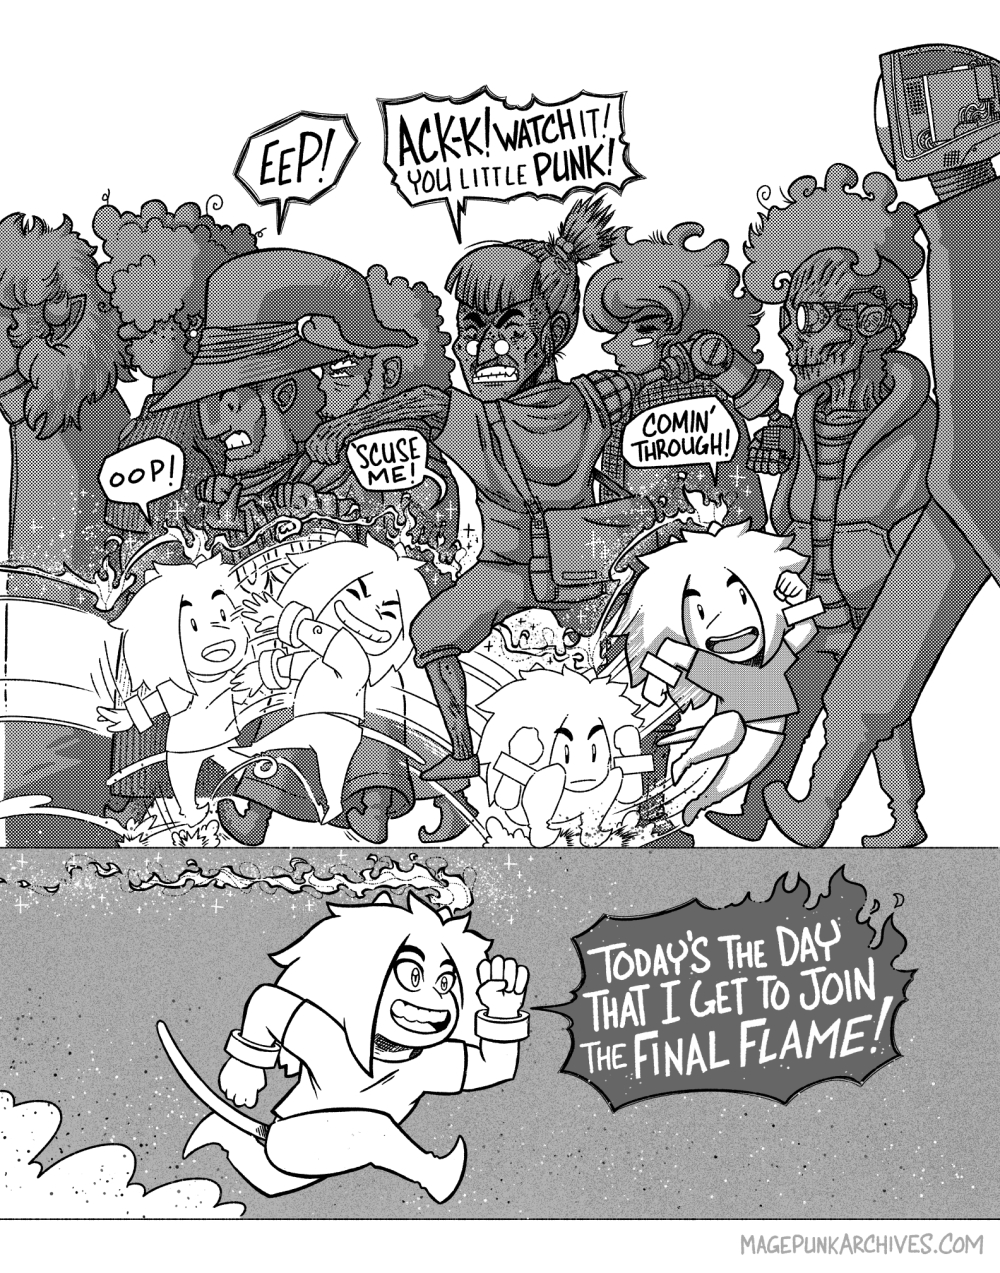 Let’s Go! Mage Punk and the Final Flame! – Page 4